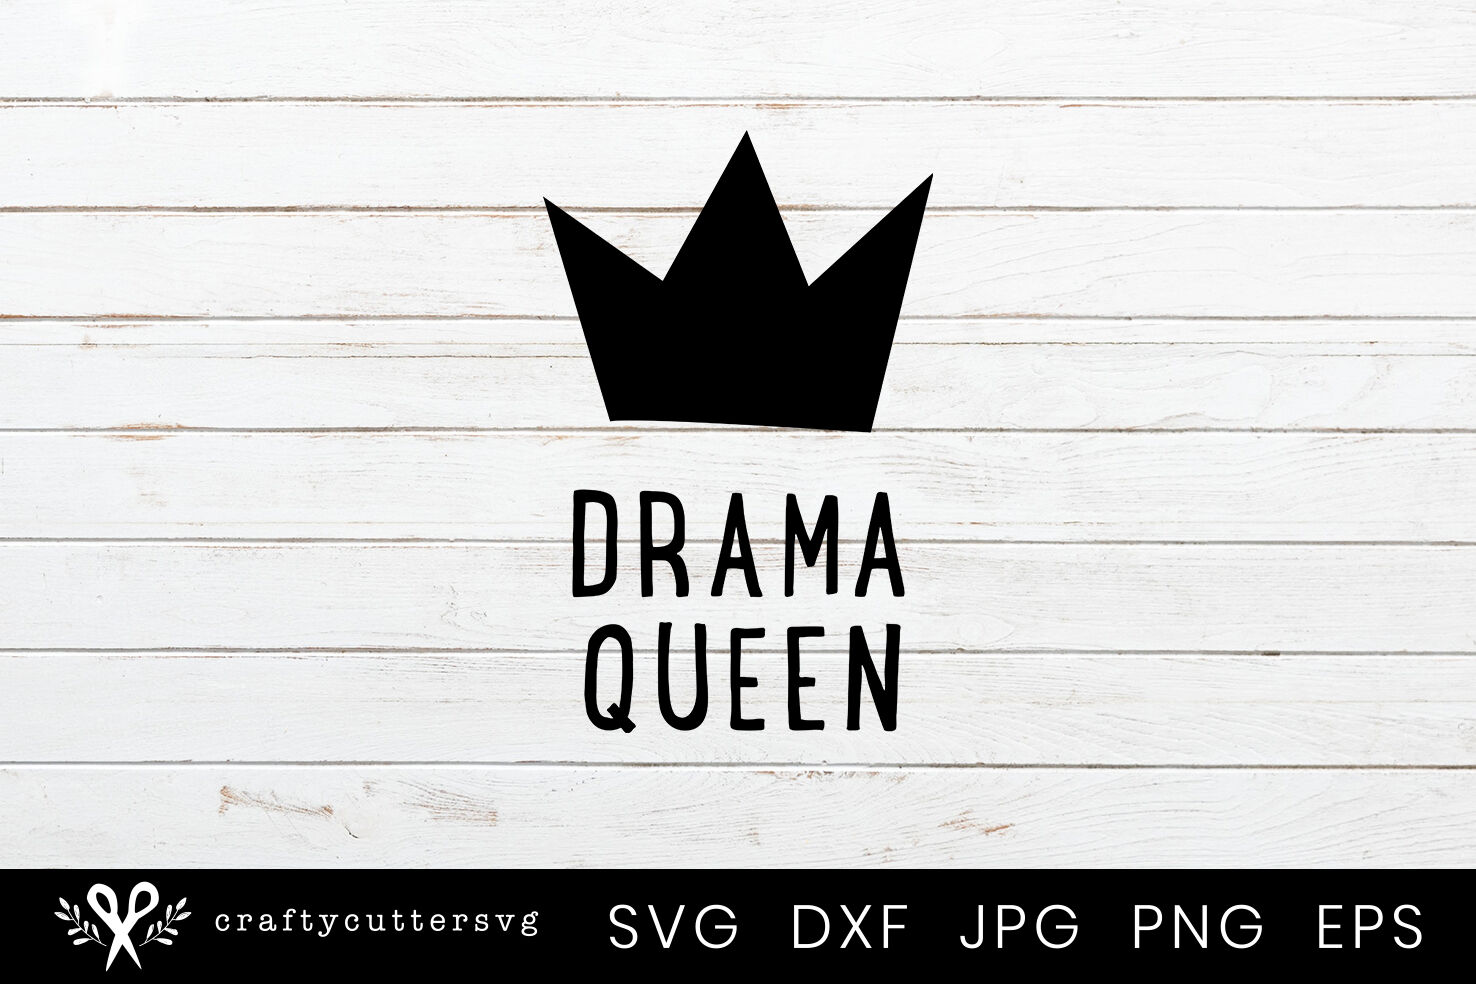 Download Drama Queen Svg Cut File Crown Clipart By Crafty Cutter Svg Thehungryjpeg Com